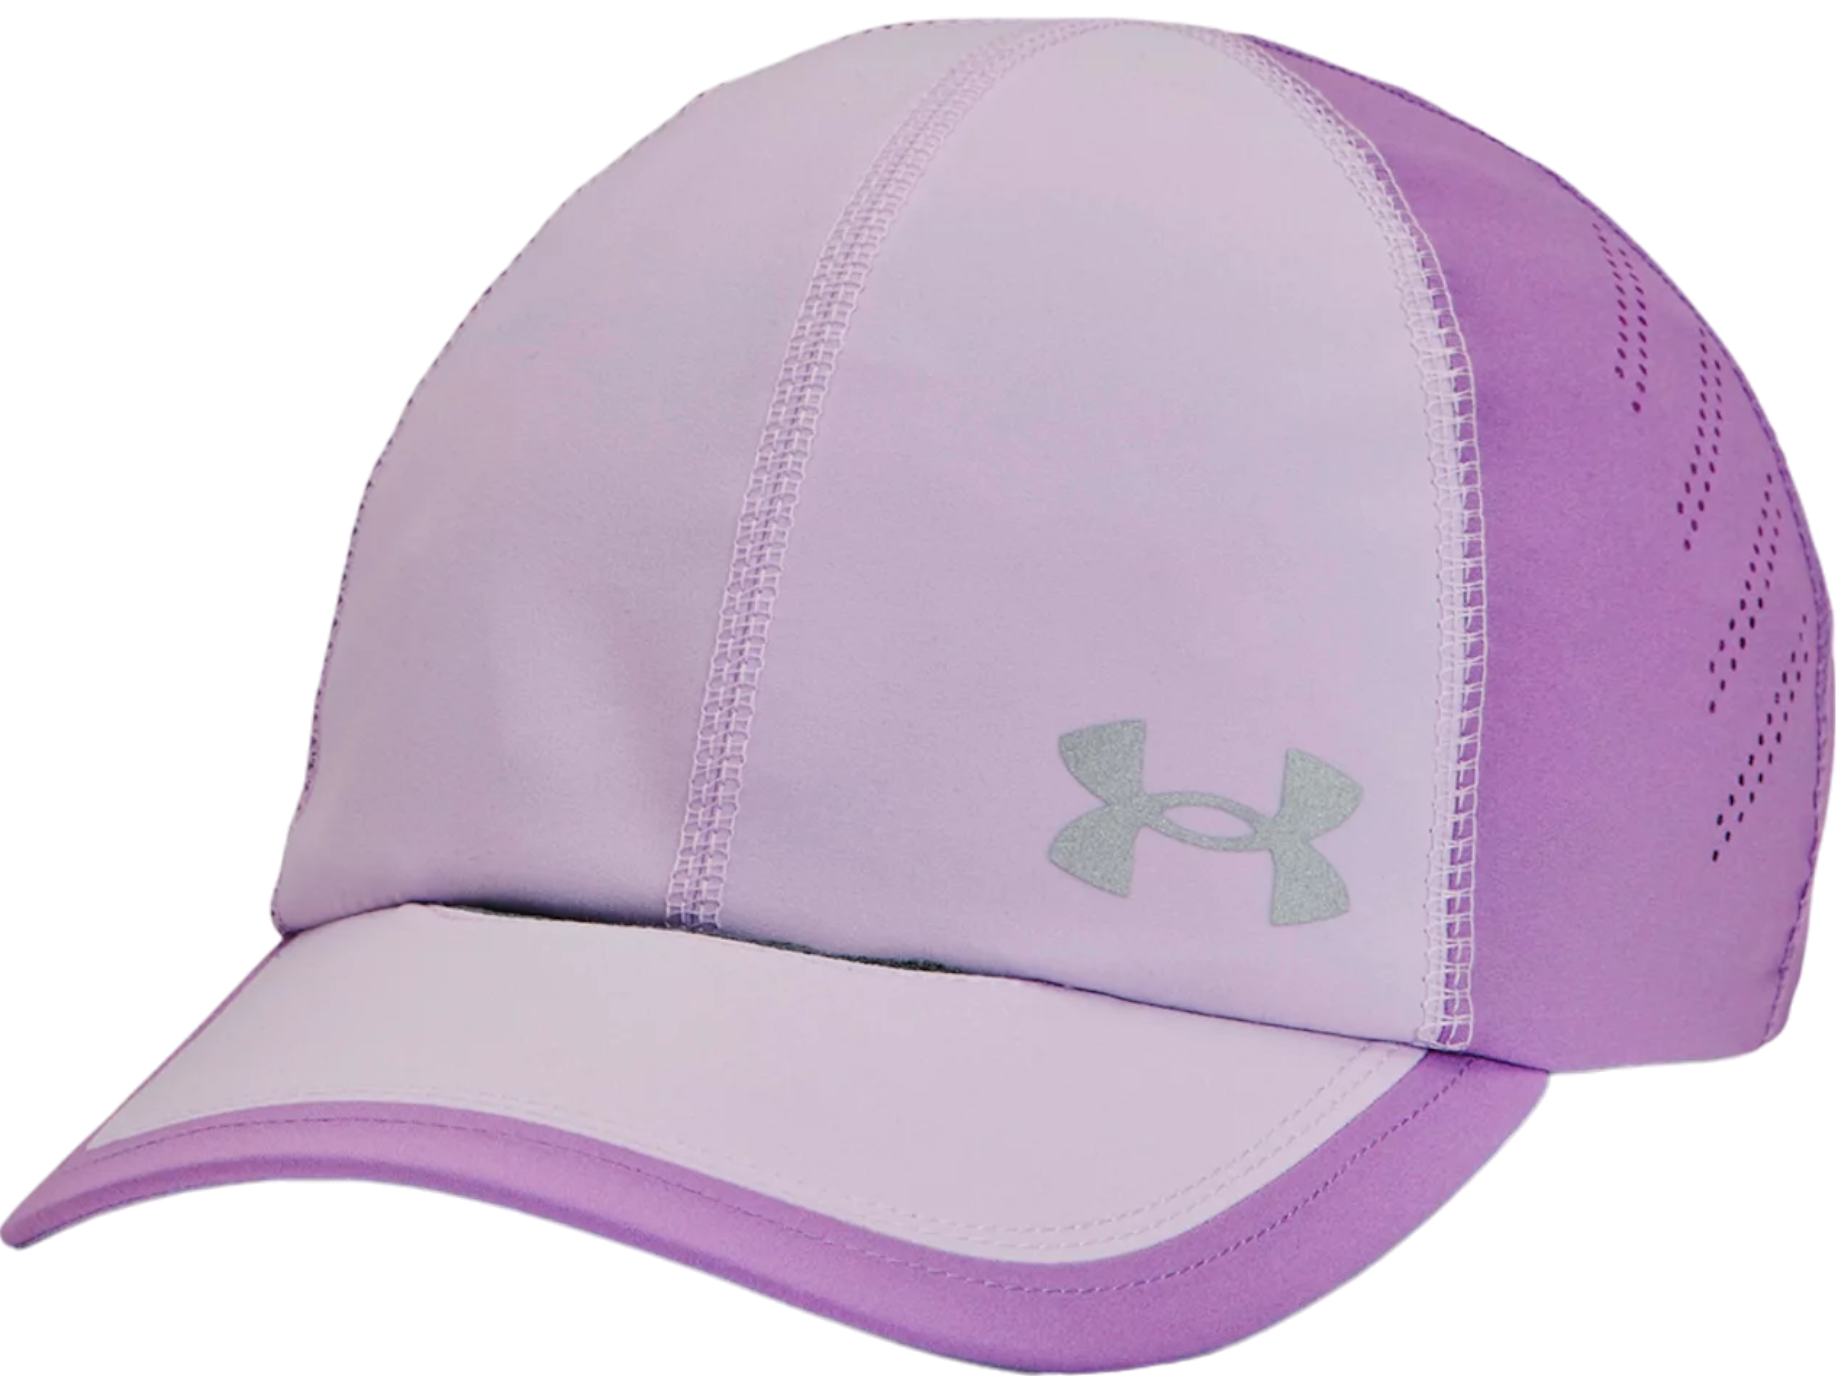 Шапка Under Armour Iso-chill Launch Adjustable